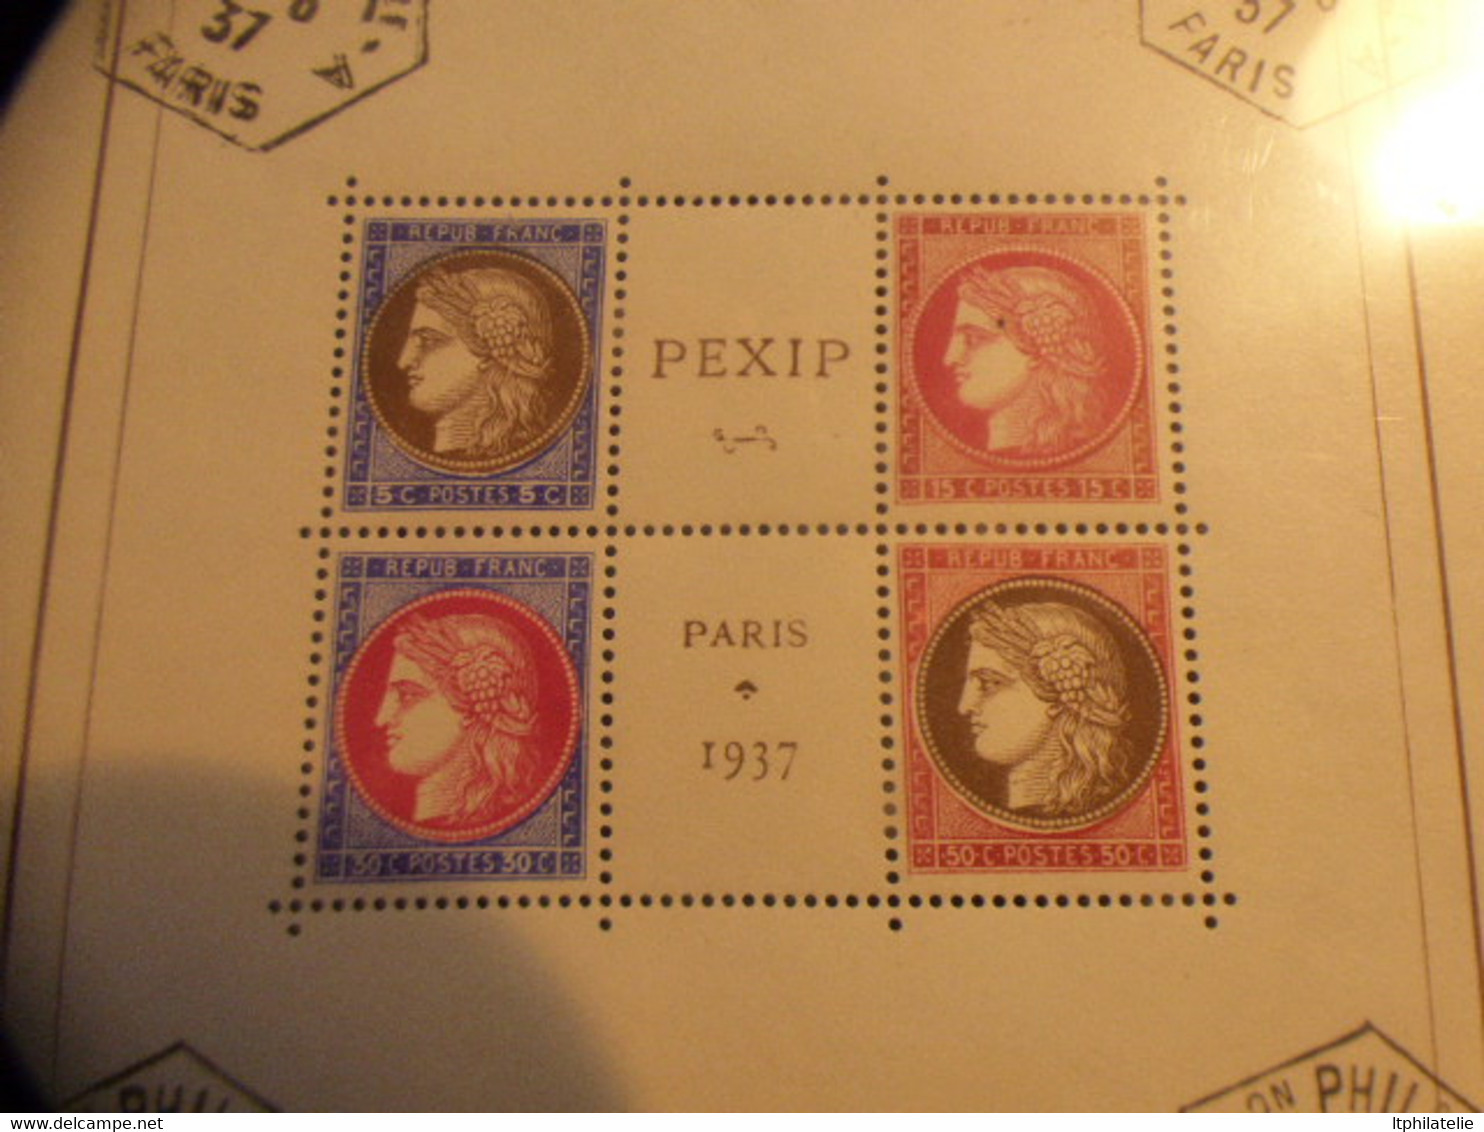 DESTOCKAGE-  FRANCE  BLOC N° 3  PEXIP  1937  CACHET EXPO HORS TIMBRES  TIMBRES ** LUXE - Mint/Hinged